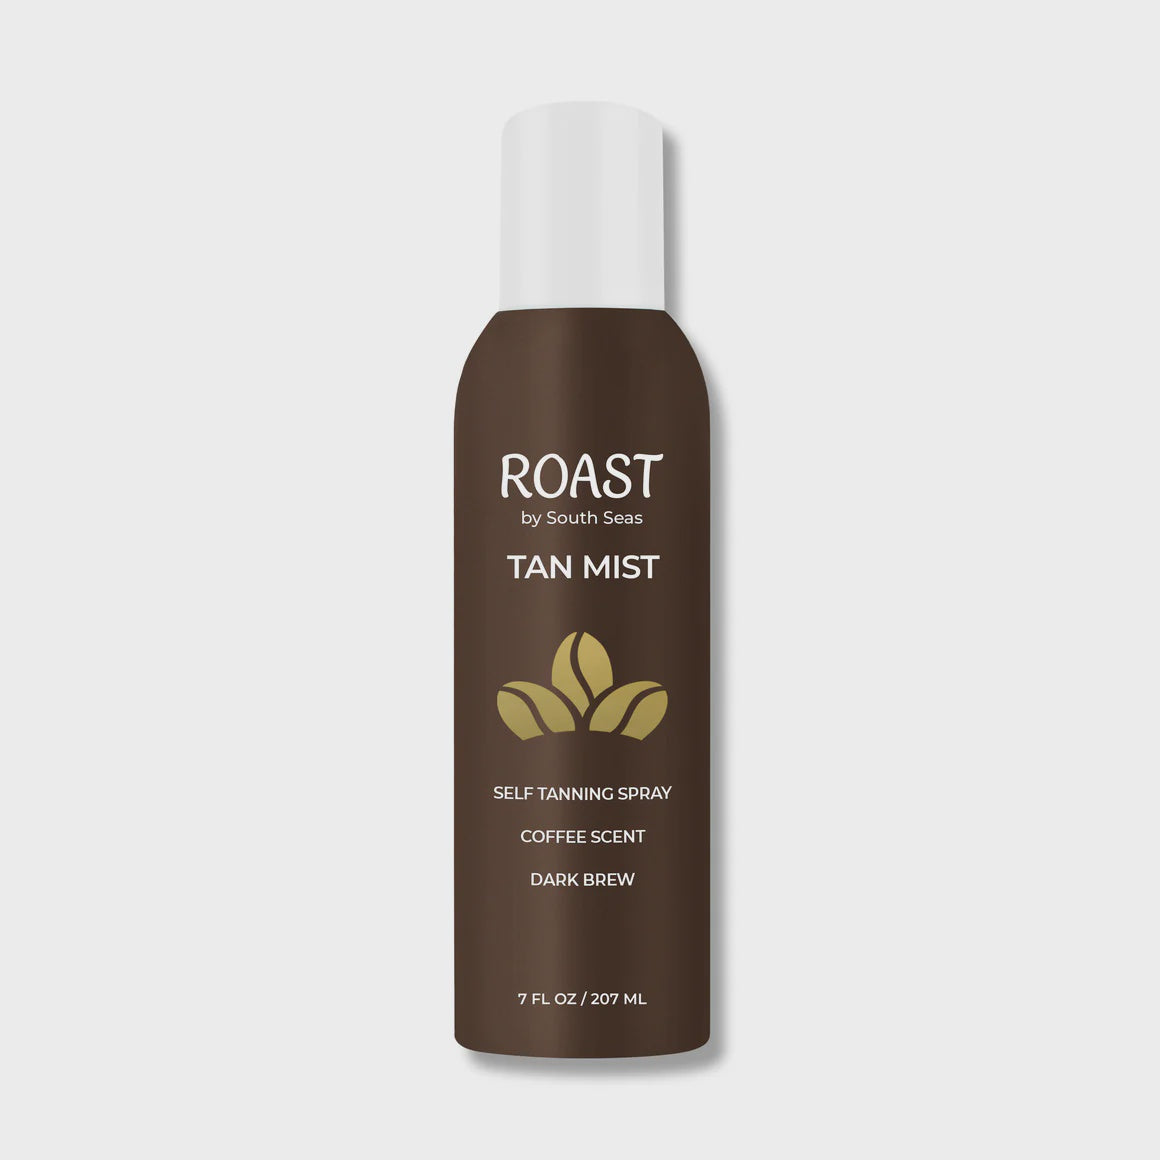 A bottle of "Roast Dark Tan Mist by South Seas Skincare" self-tanning spray with a coffee scent is displayed against a white background in a Scottsdale, Arizona bungalow. The bottle is brown with a white label and a green coffee bean icon.